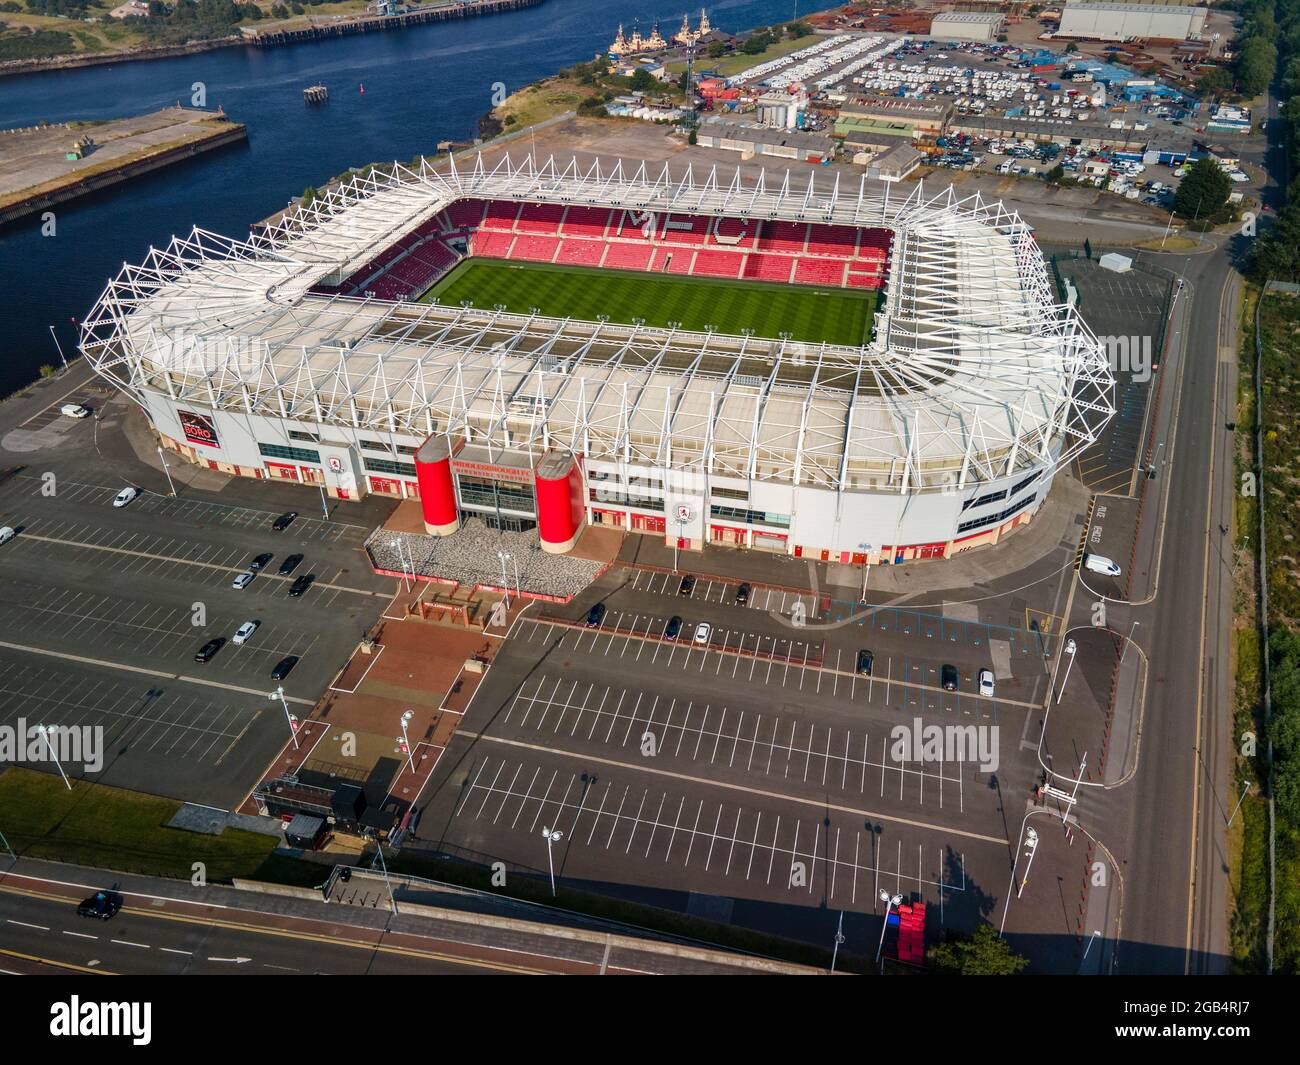 Aerial View of The Riverside Stadium Middlesbrough Football Club Drone  Stock Photo - Alamy